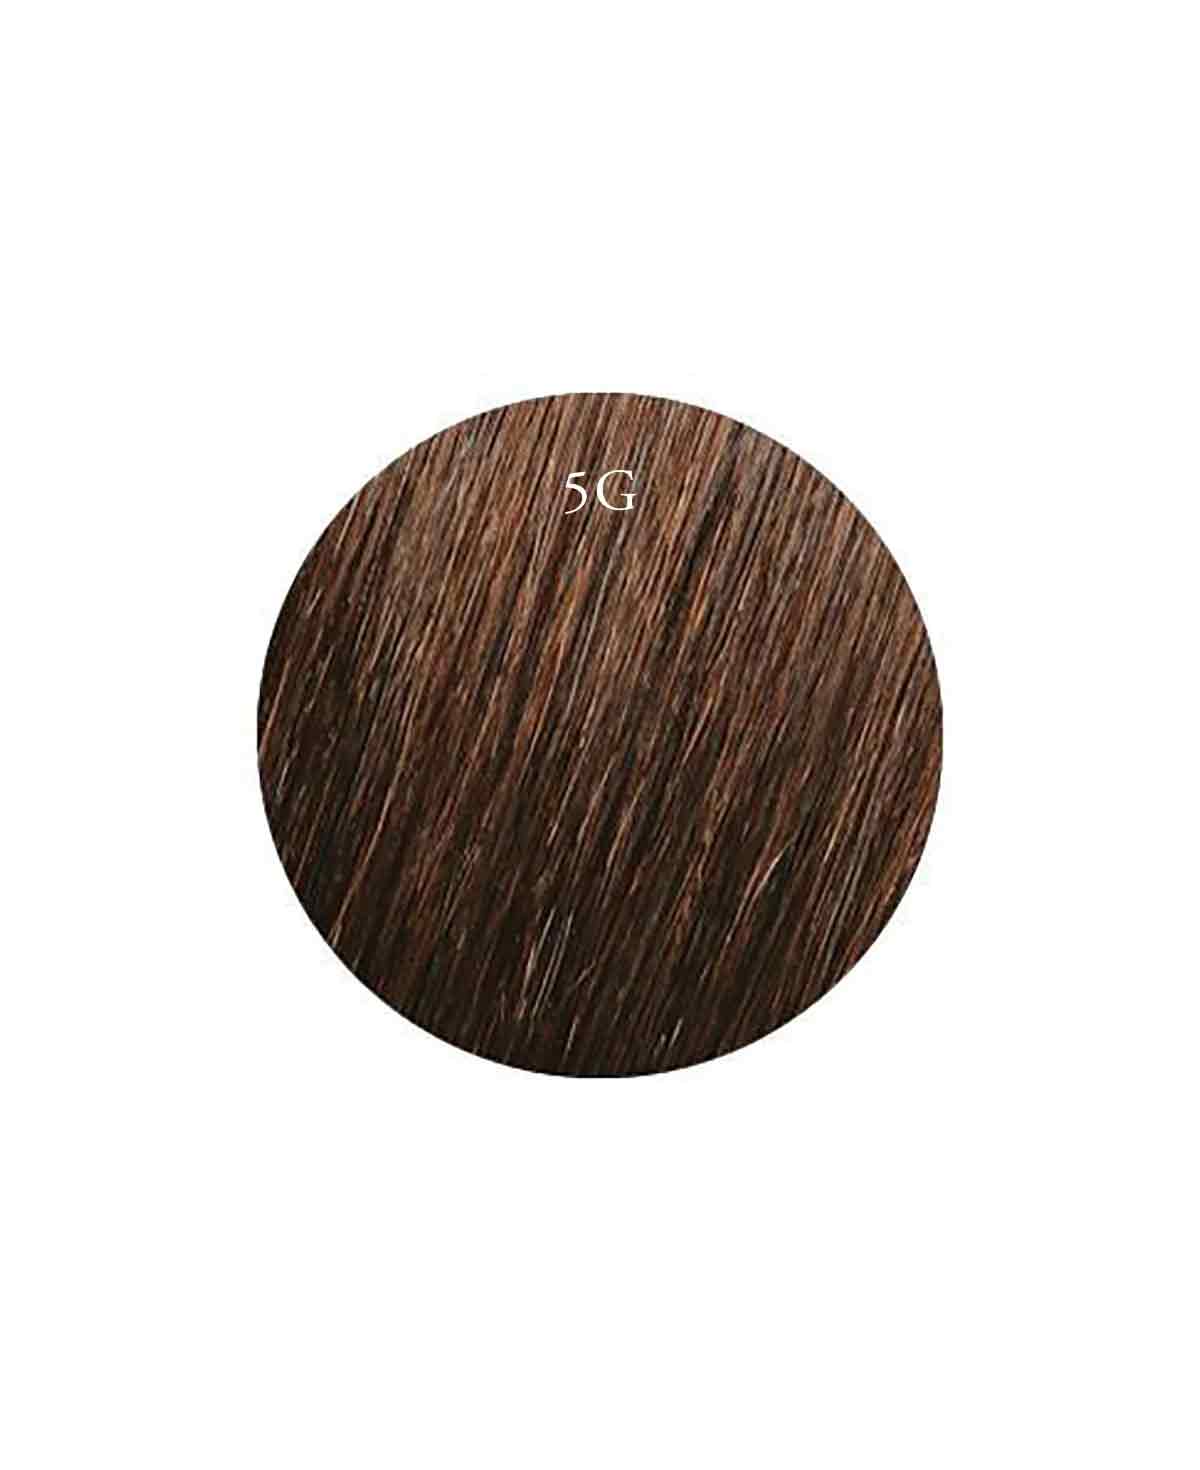 30-35cm (14") TAPE HAIR EXTENSIONS - BROWN - 5G